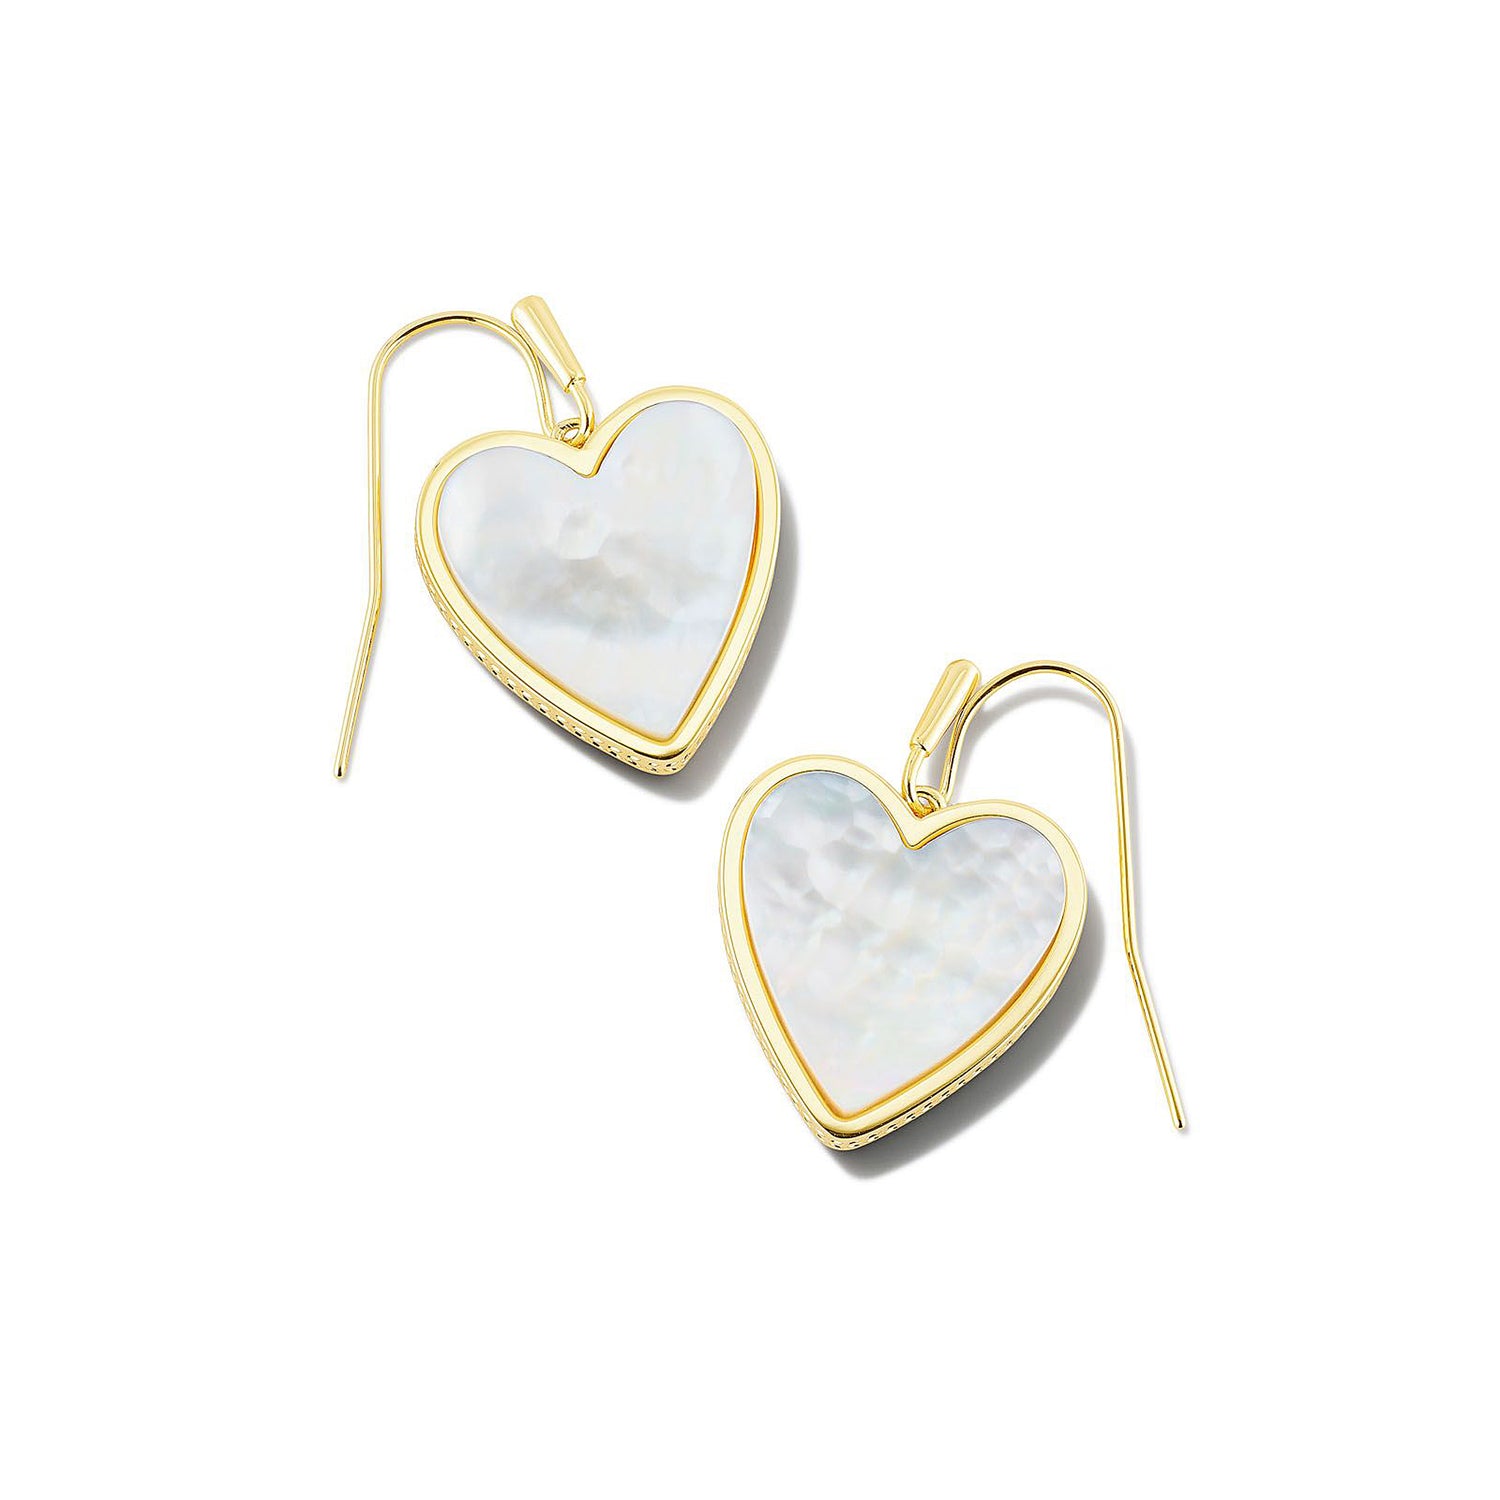 Kendra Scott Heart Dangle Drop Earrings in Ivory Mother of Pearl and Gold